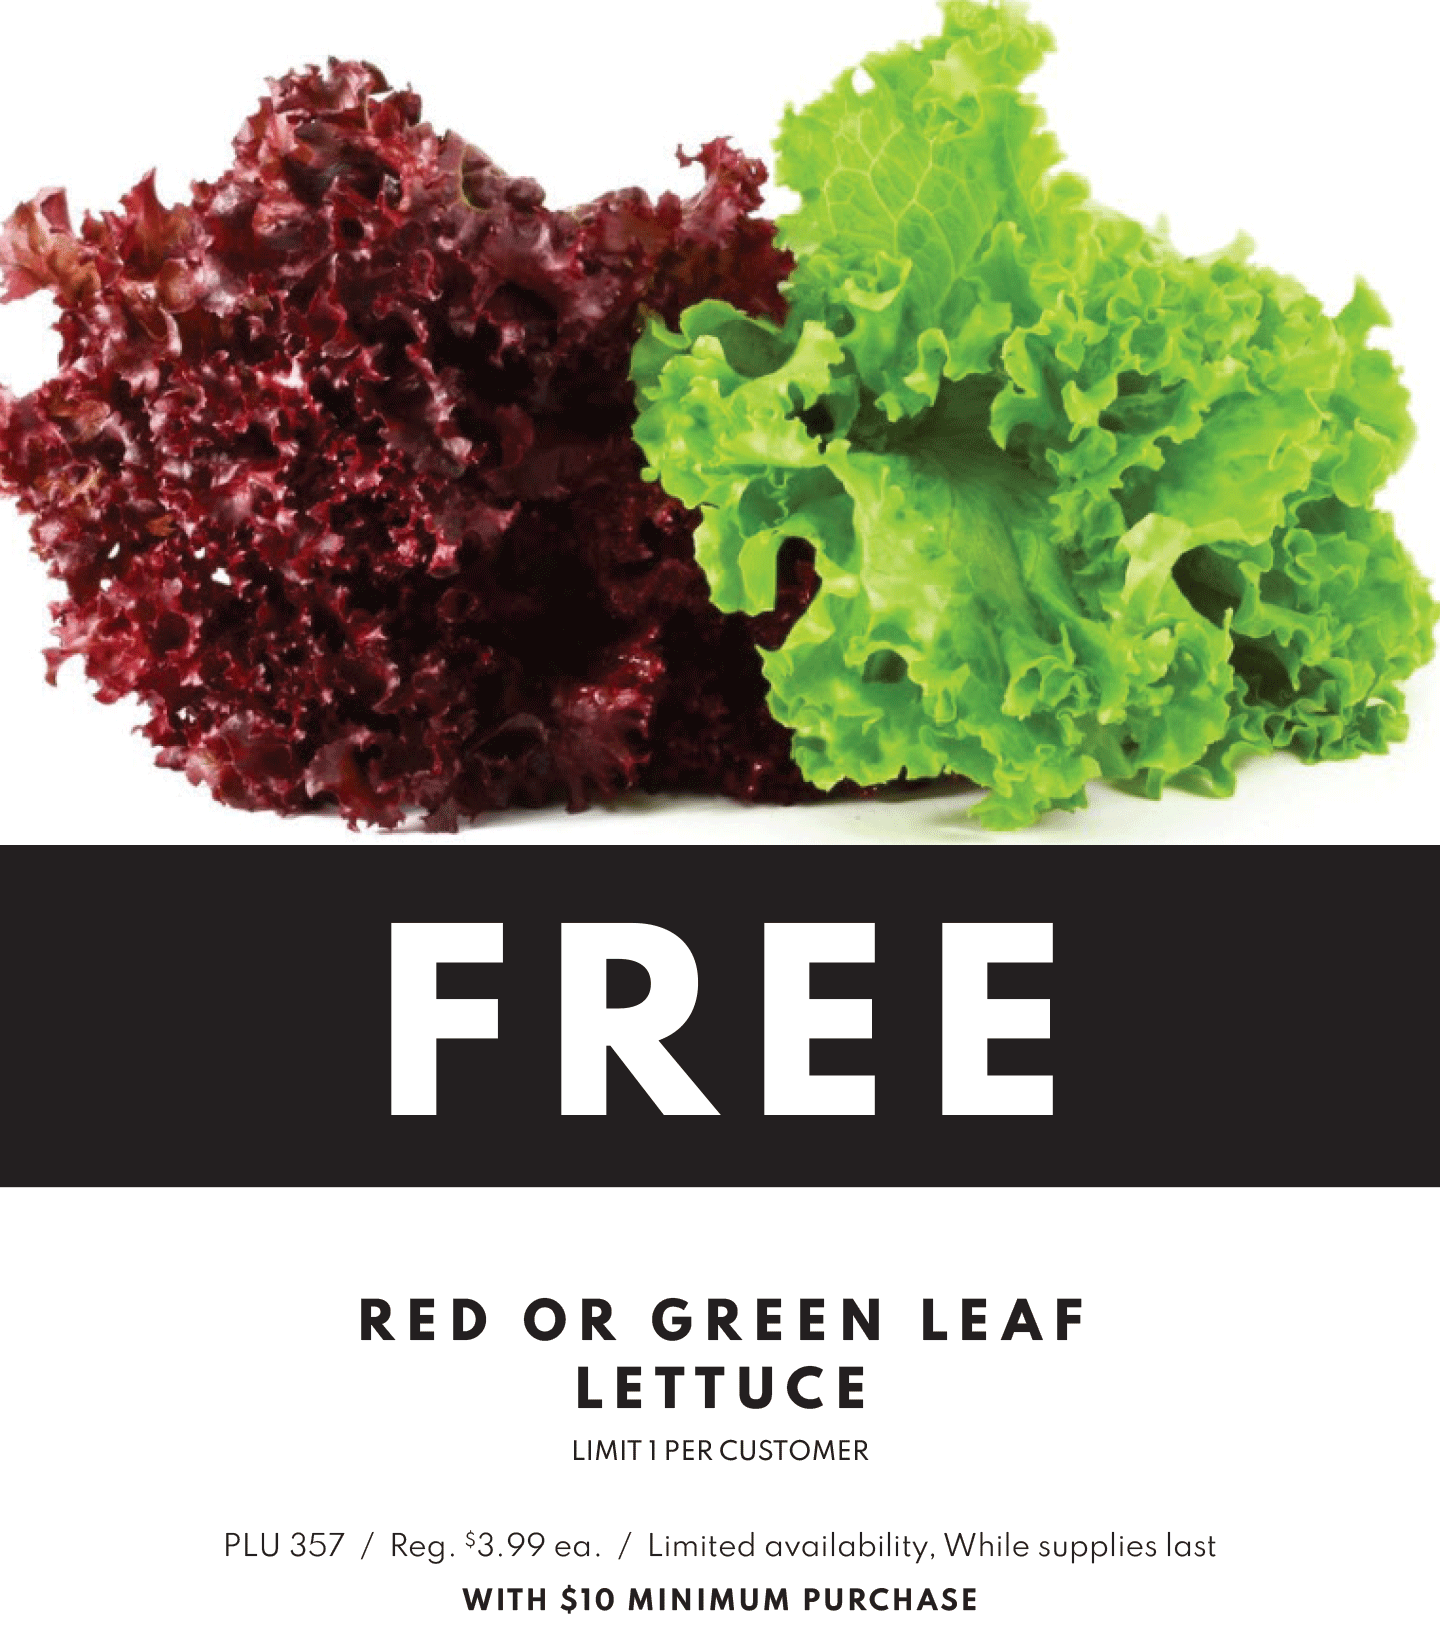 FREE Red or Green Leaf Lettuce, limit 1 per customer, with $10 minimum purchase, limited availability, while supplies last.